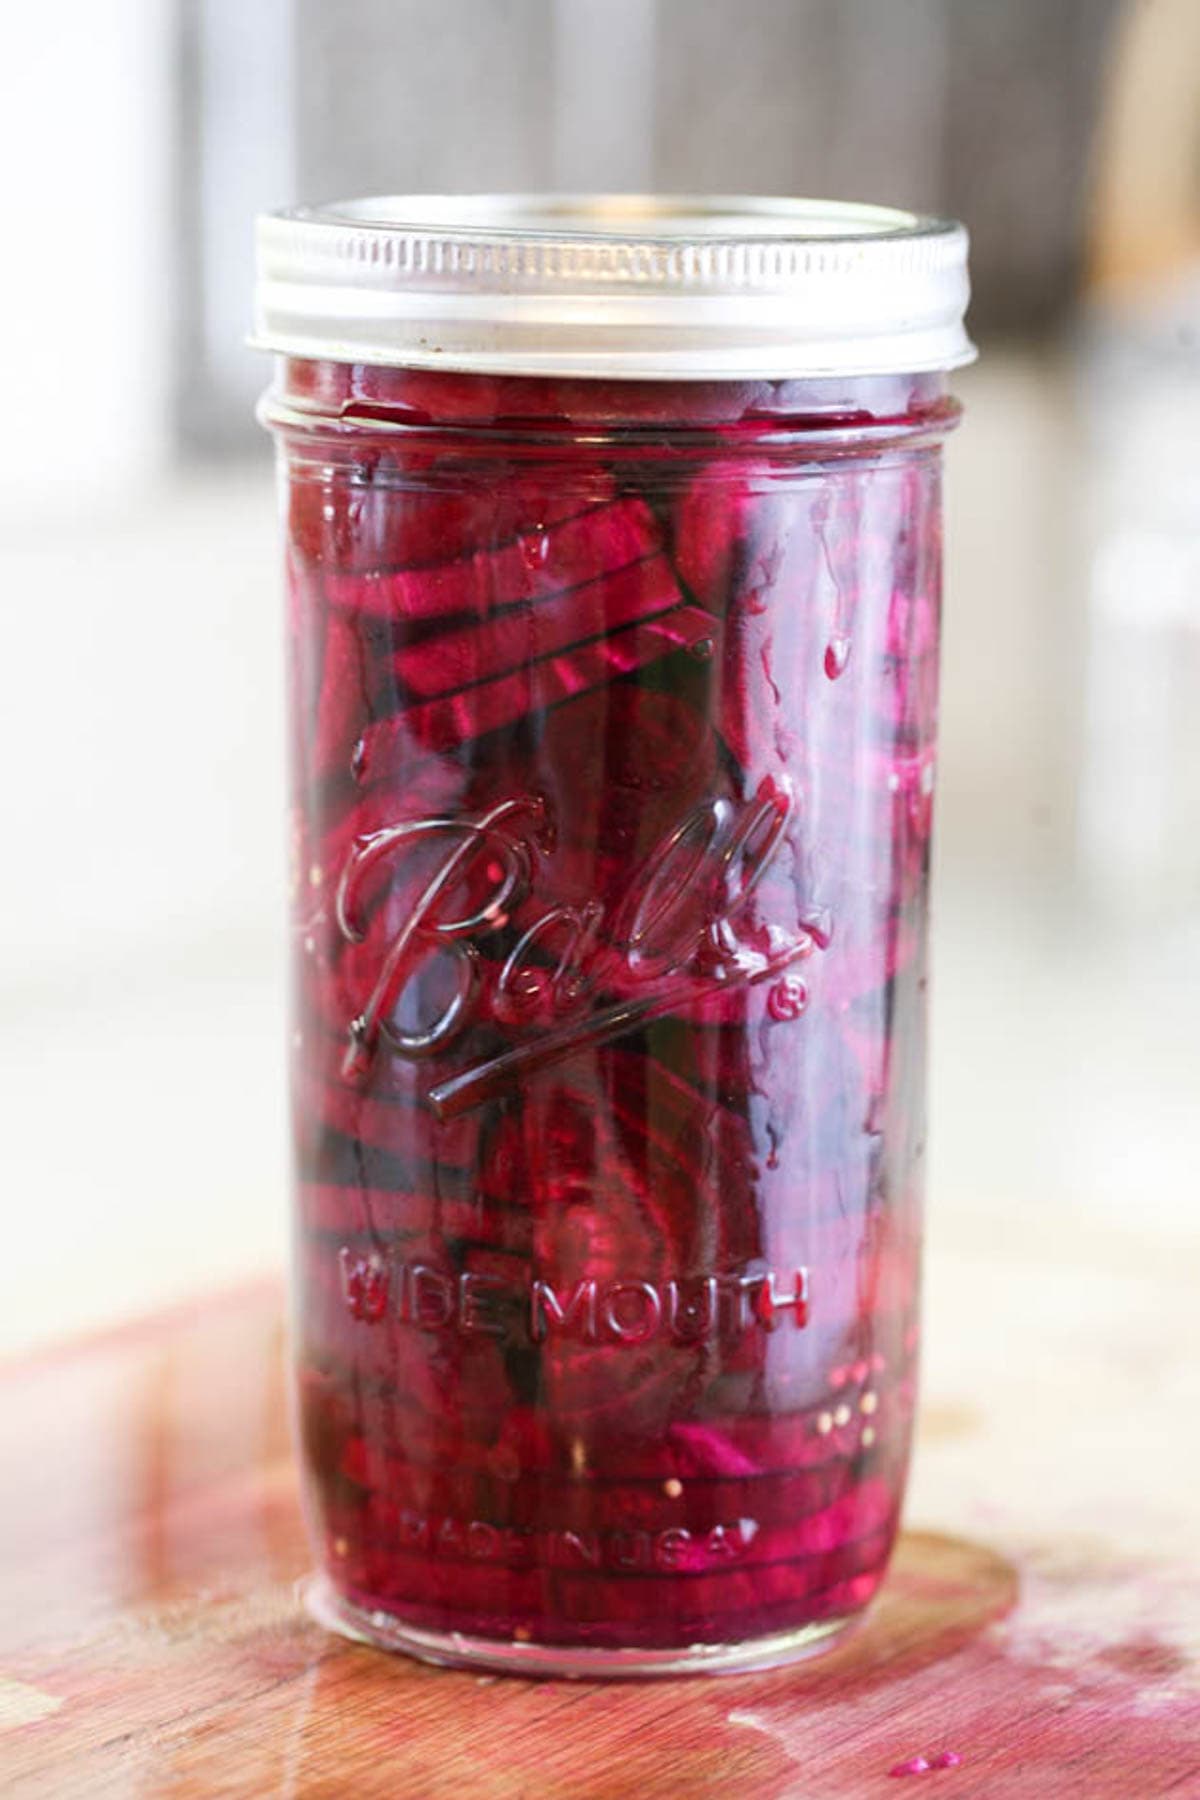 Closing the jar and letting the beets ferment